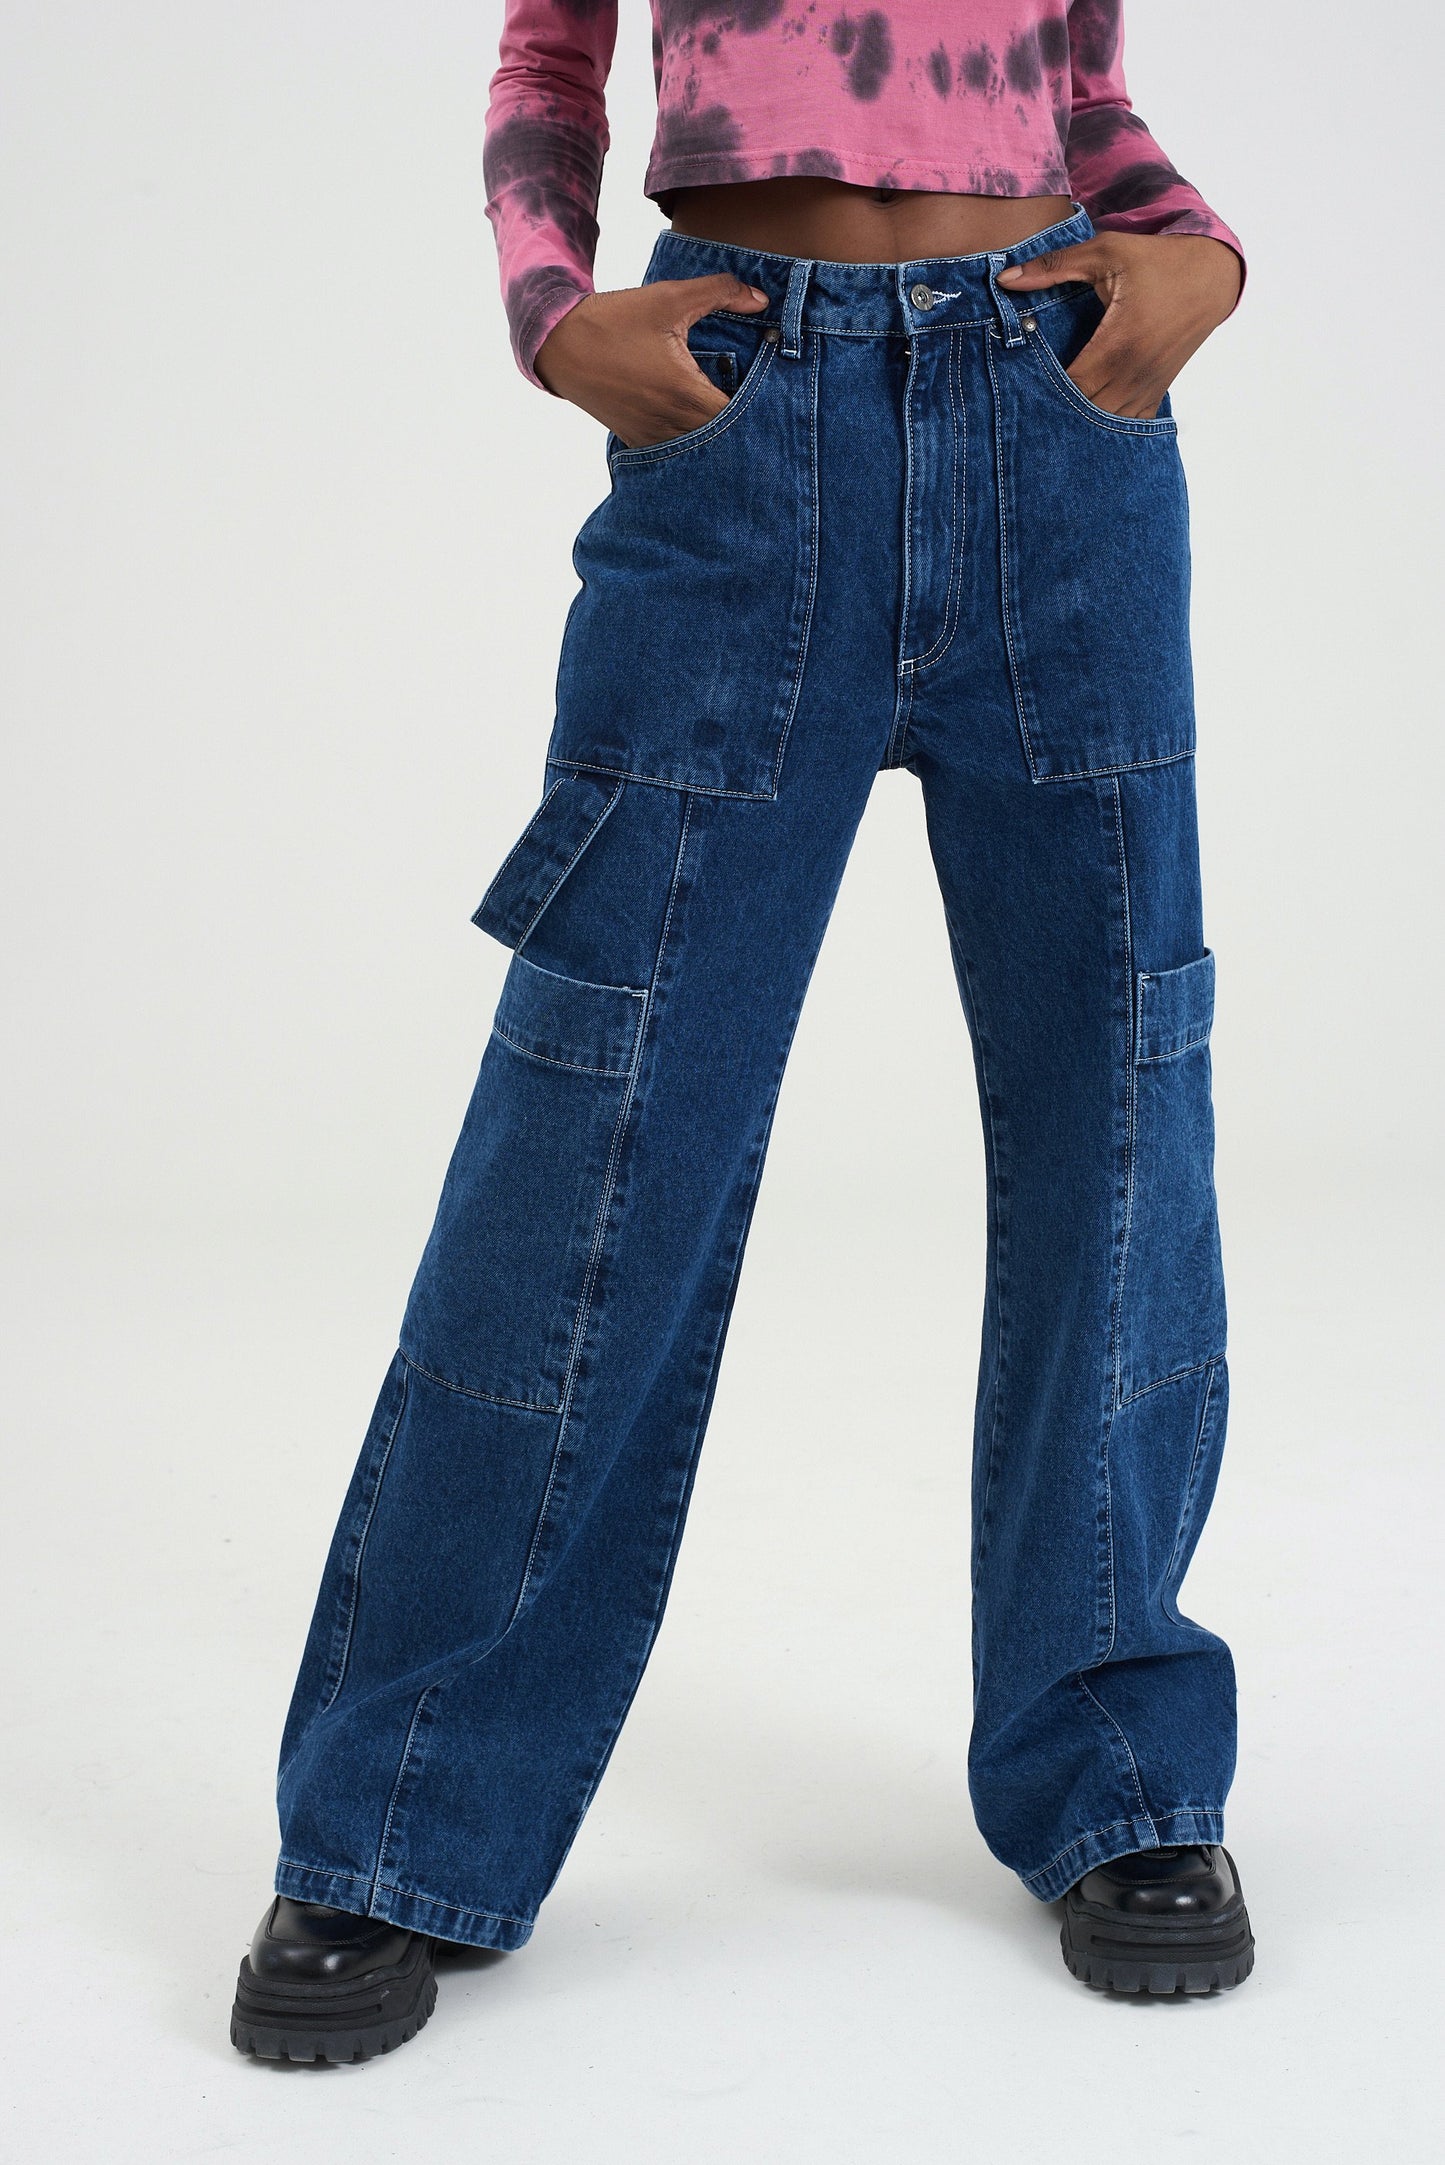 Shapeshifter Combat Jeans Ragged Jeans